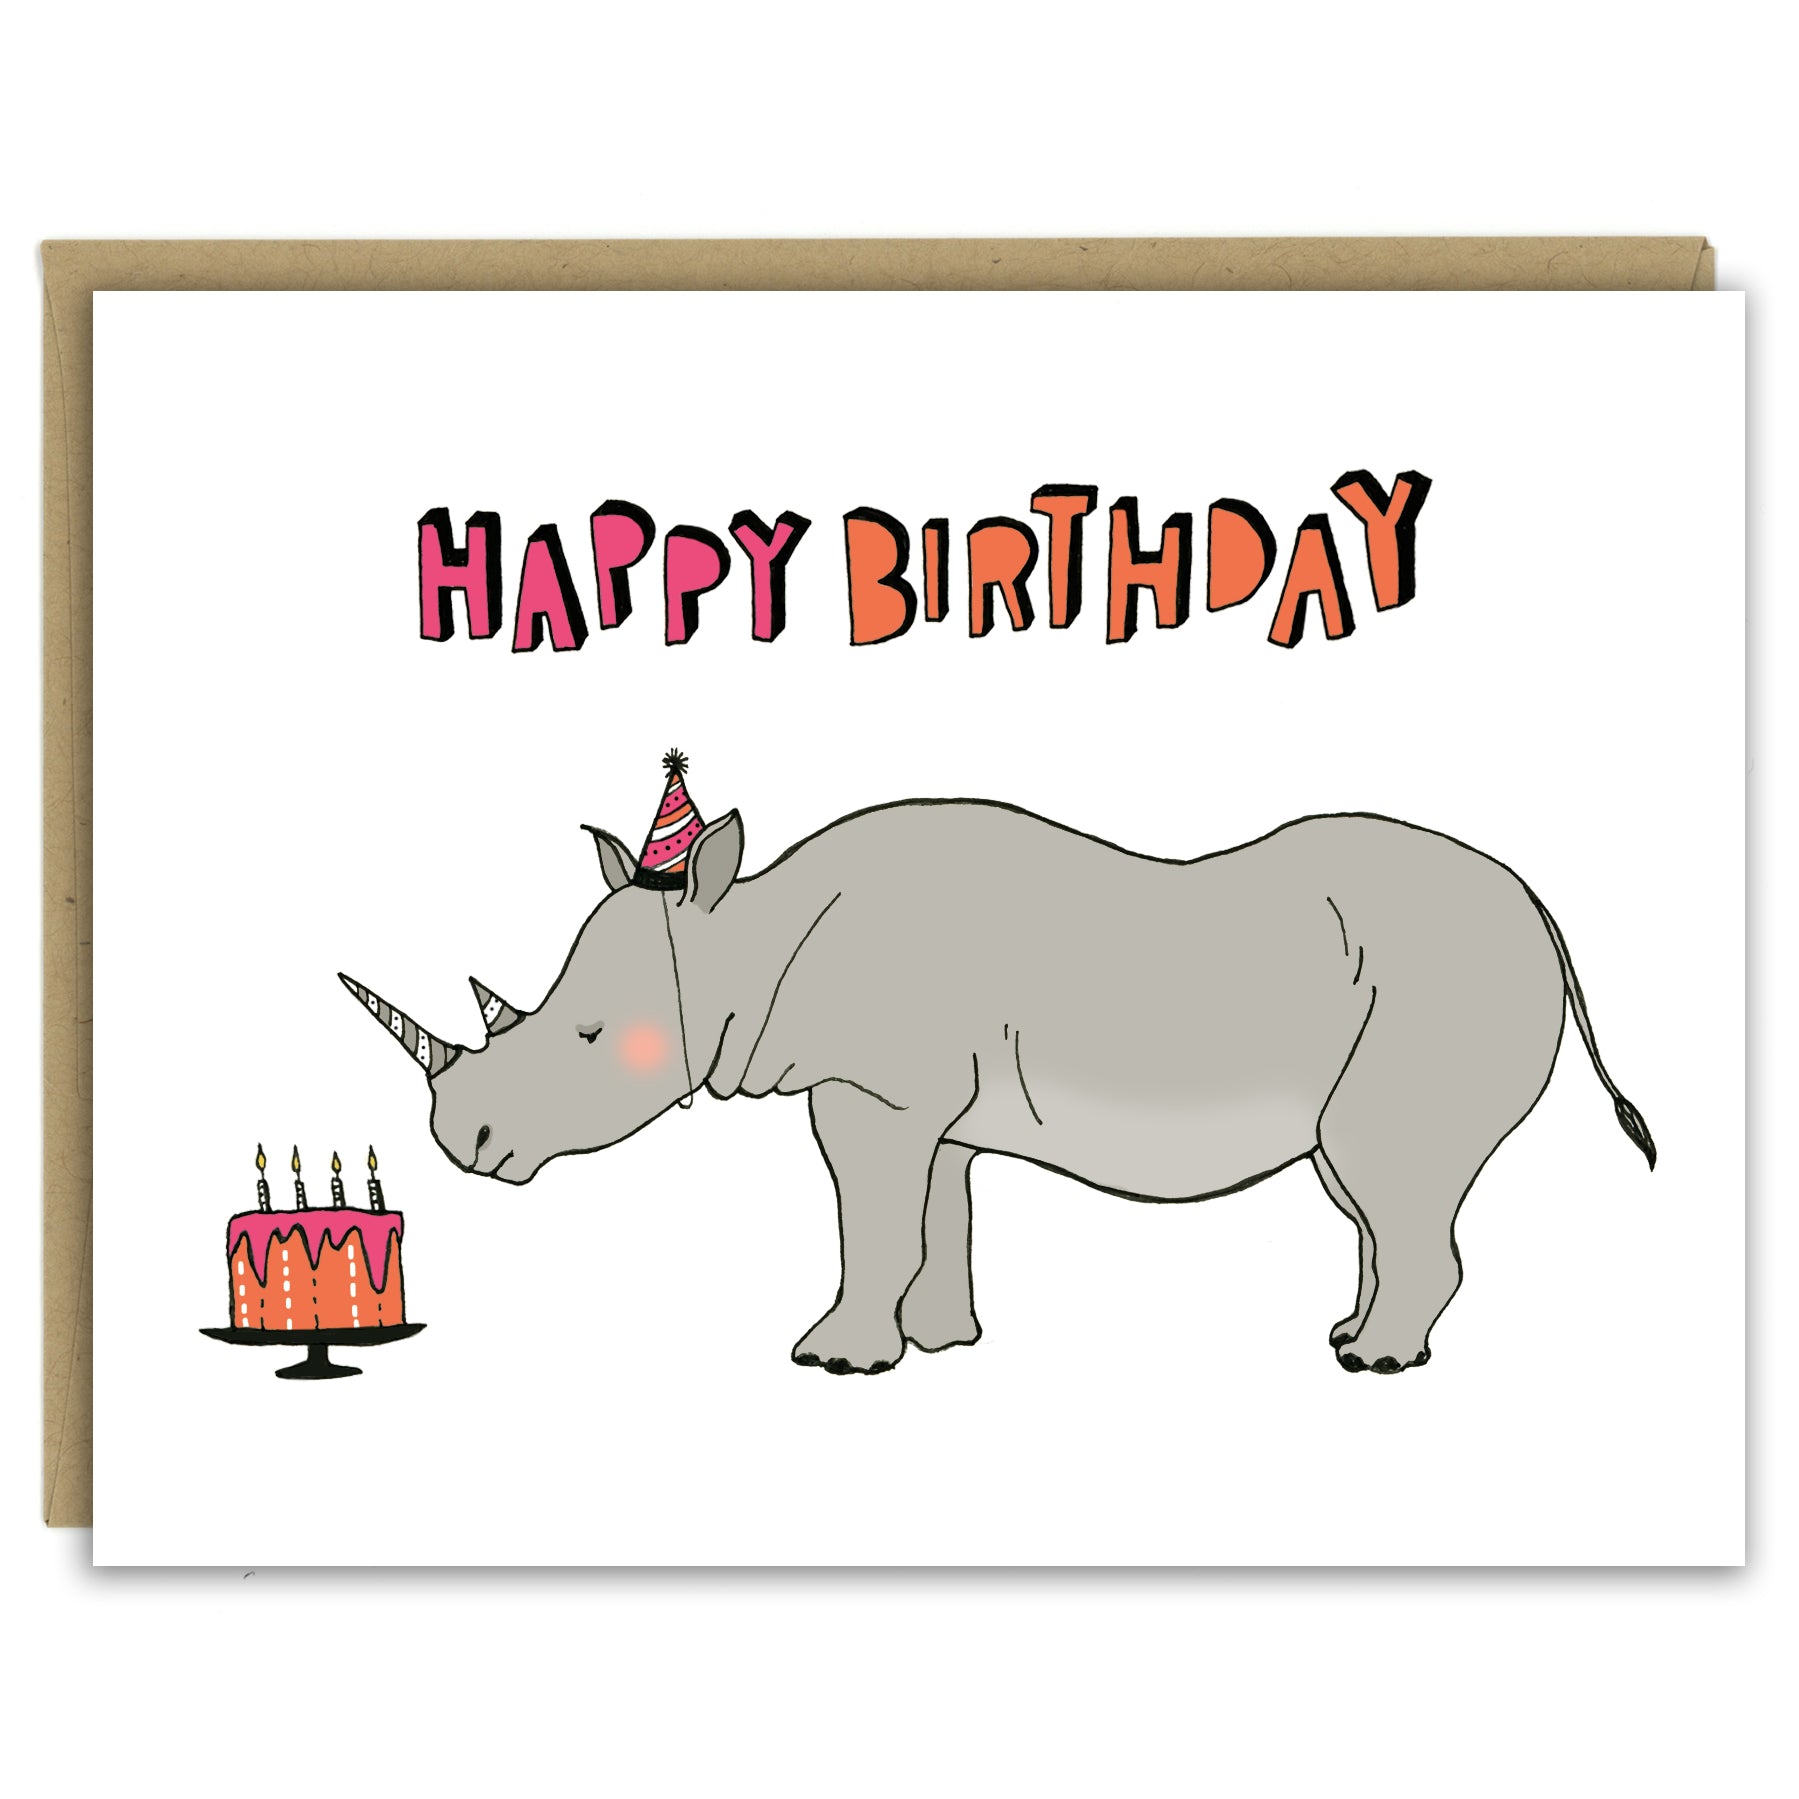 A greeting card showing a hand-drawn illustration of a rhinoceros wearing a pink and black striped party hat that matches stripes on his horns, looking at an orange and pink birthday cake. A hand-lettered message reads, "Happy Birthday." Shown with a Kraft paper envelope on a white background. 